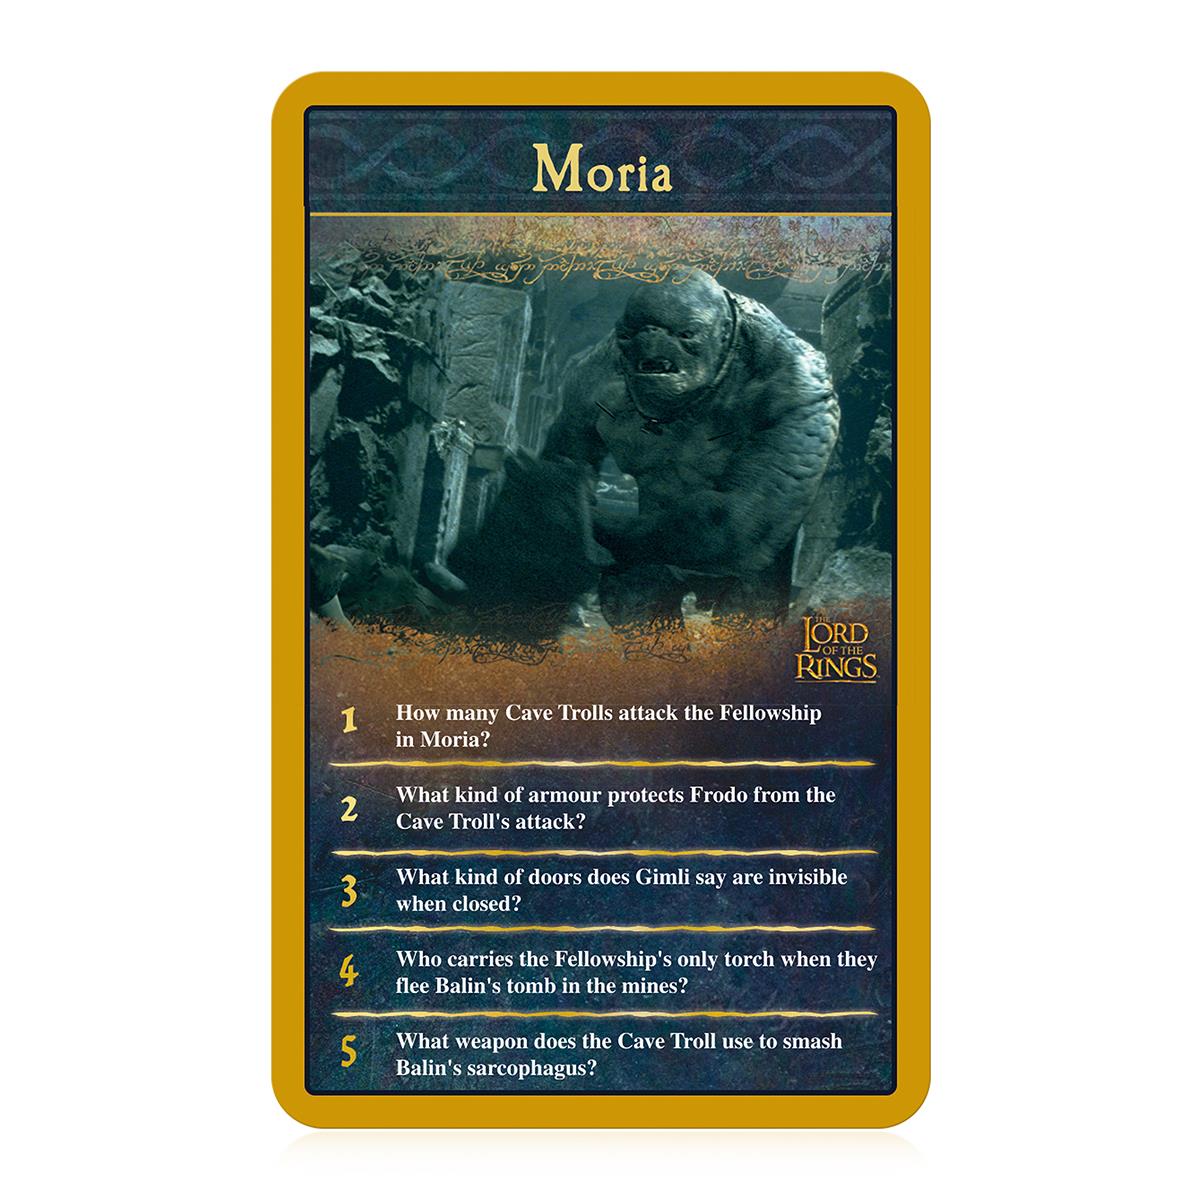 The Lord of the Rings Top Trumps Quiz Game Card Game